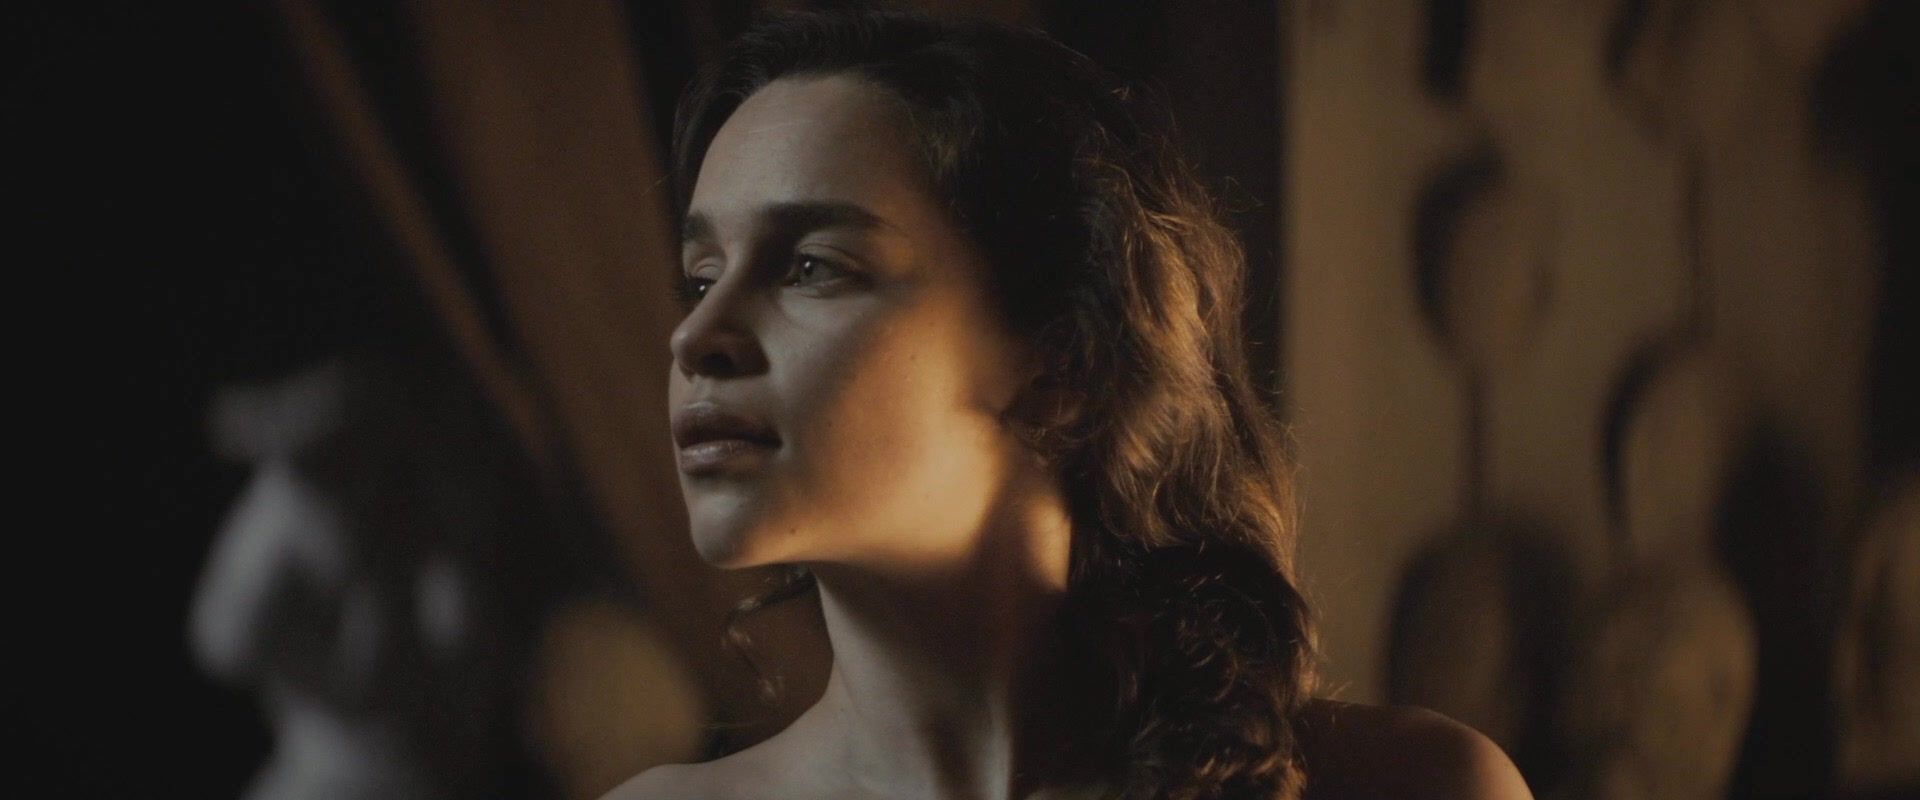 European Porn Sex video Emilia Clarke nude - Voice from the Stone (2017) Compilation - 2